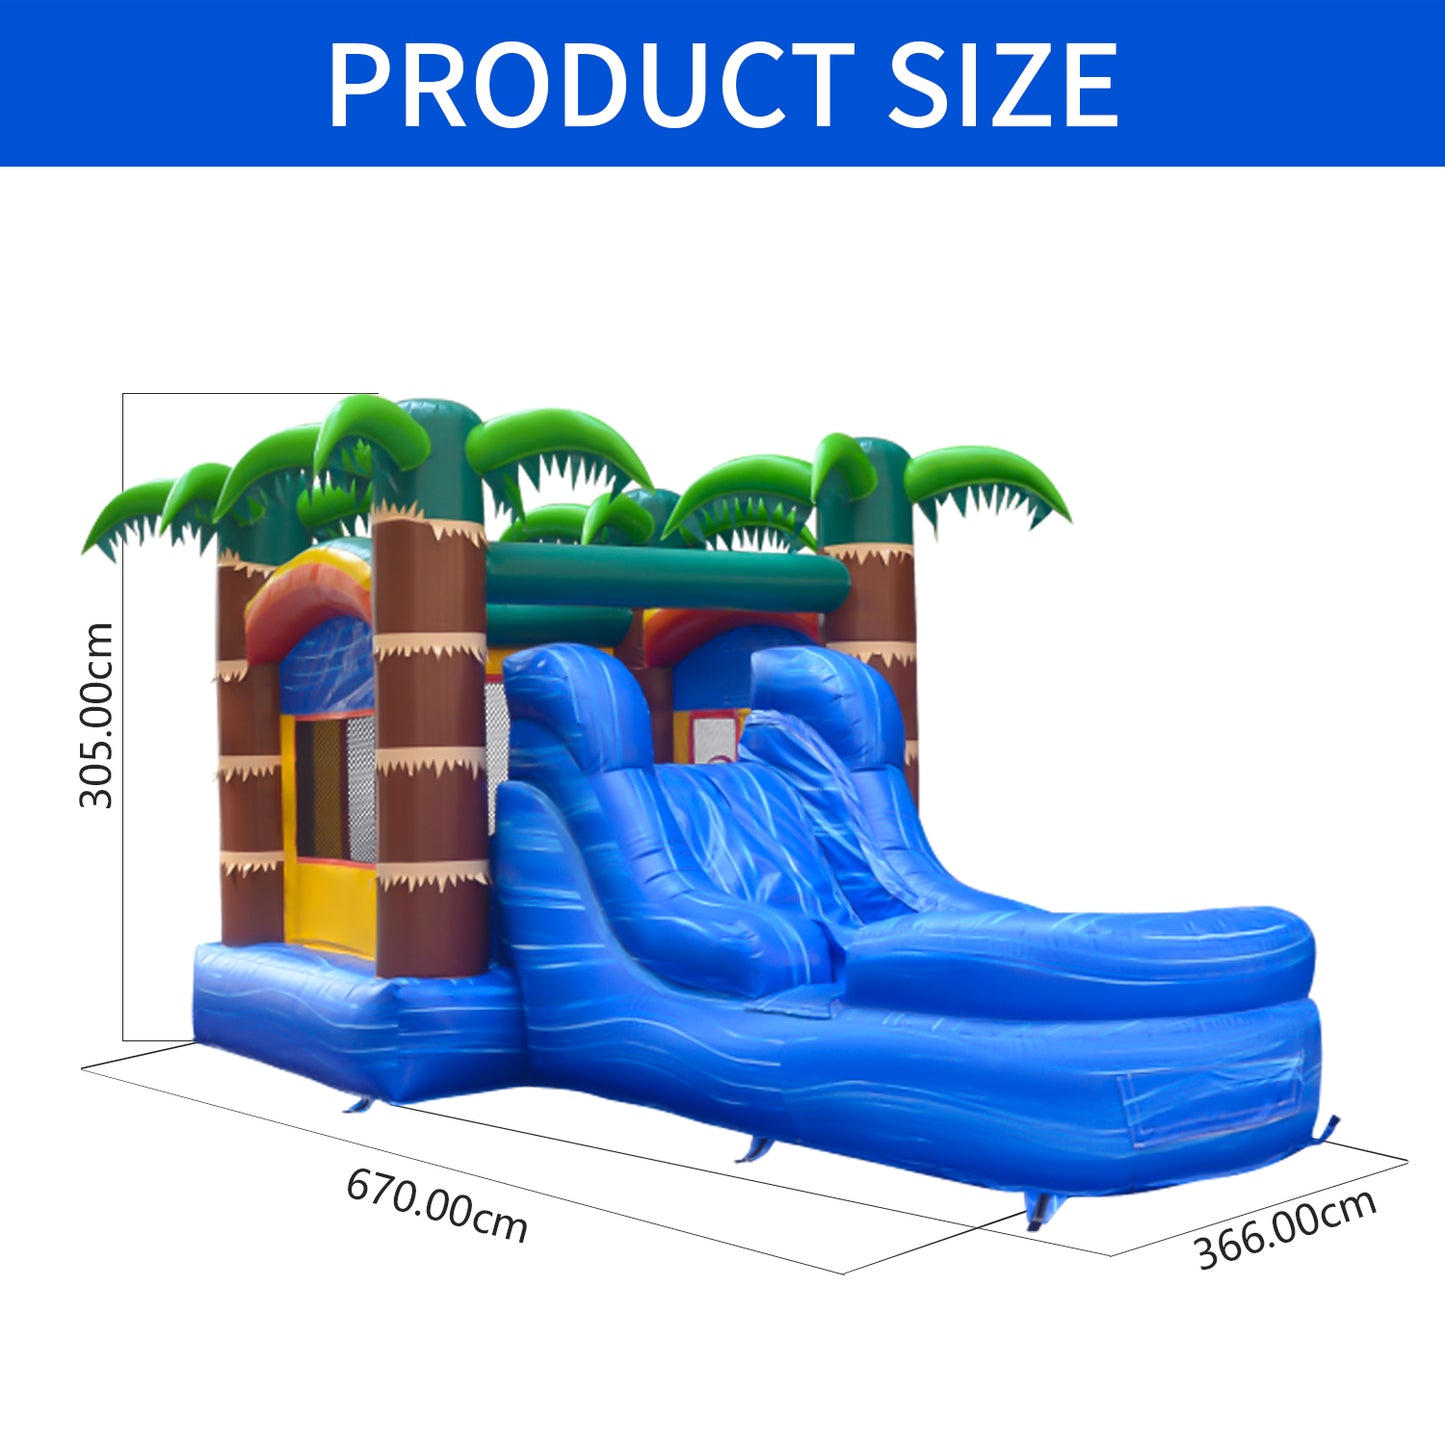 COMING Wet/Dry Tropical Hideout Commercial Inflatable Water Slide 22' x 12' x 10'H #11157